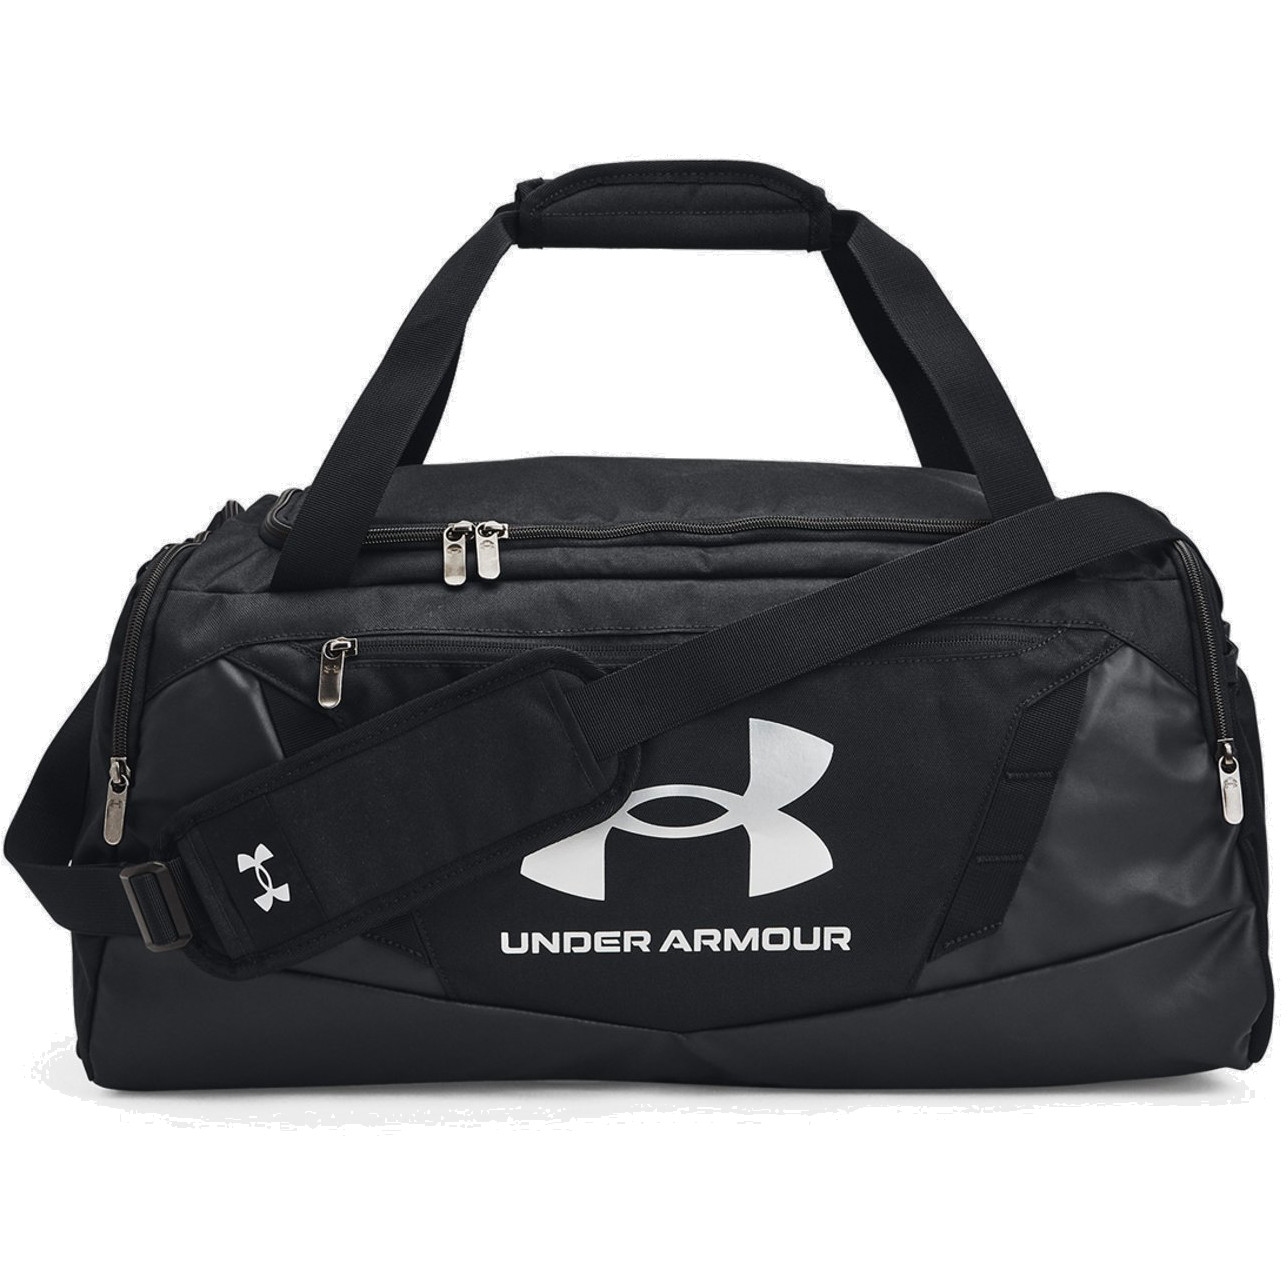 Picture of Under Armour UA Undeniable 5.0 Small Duffle Bag - Black/Black/Metallic Silver